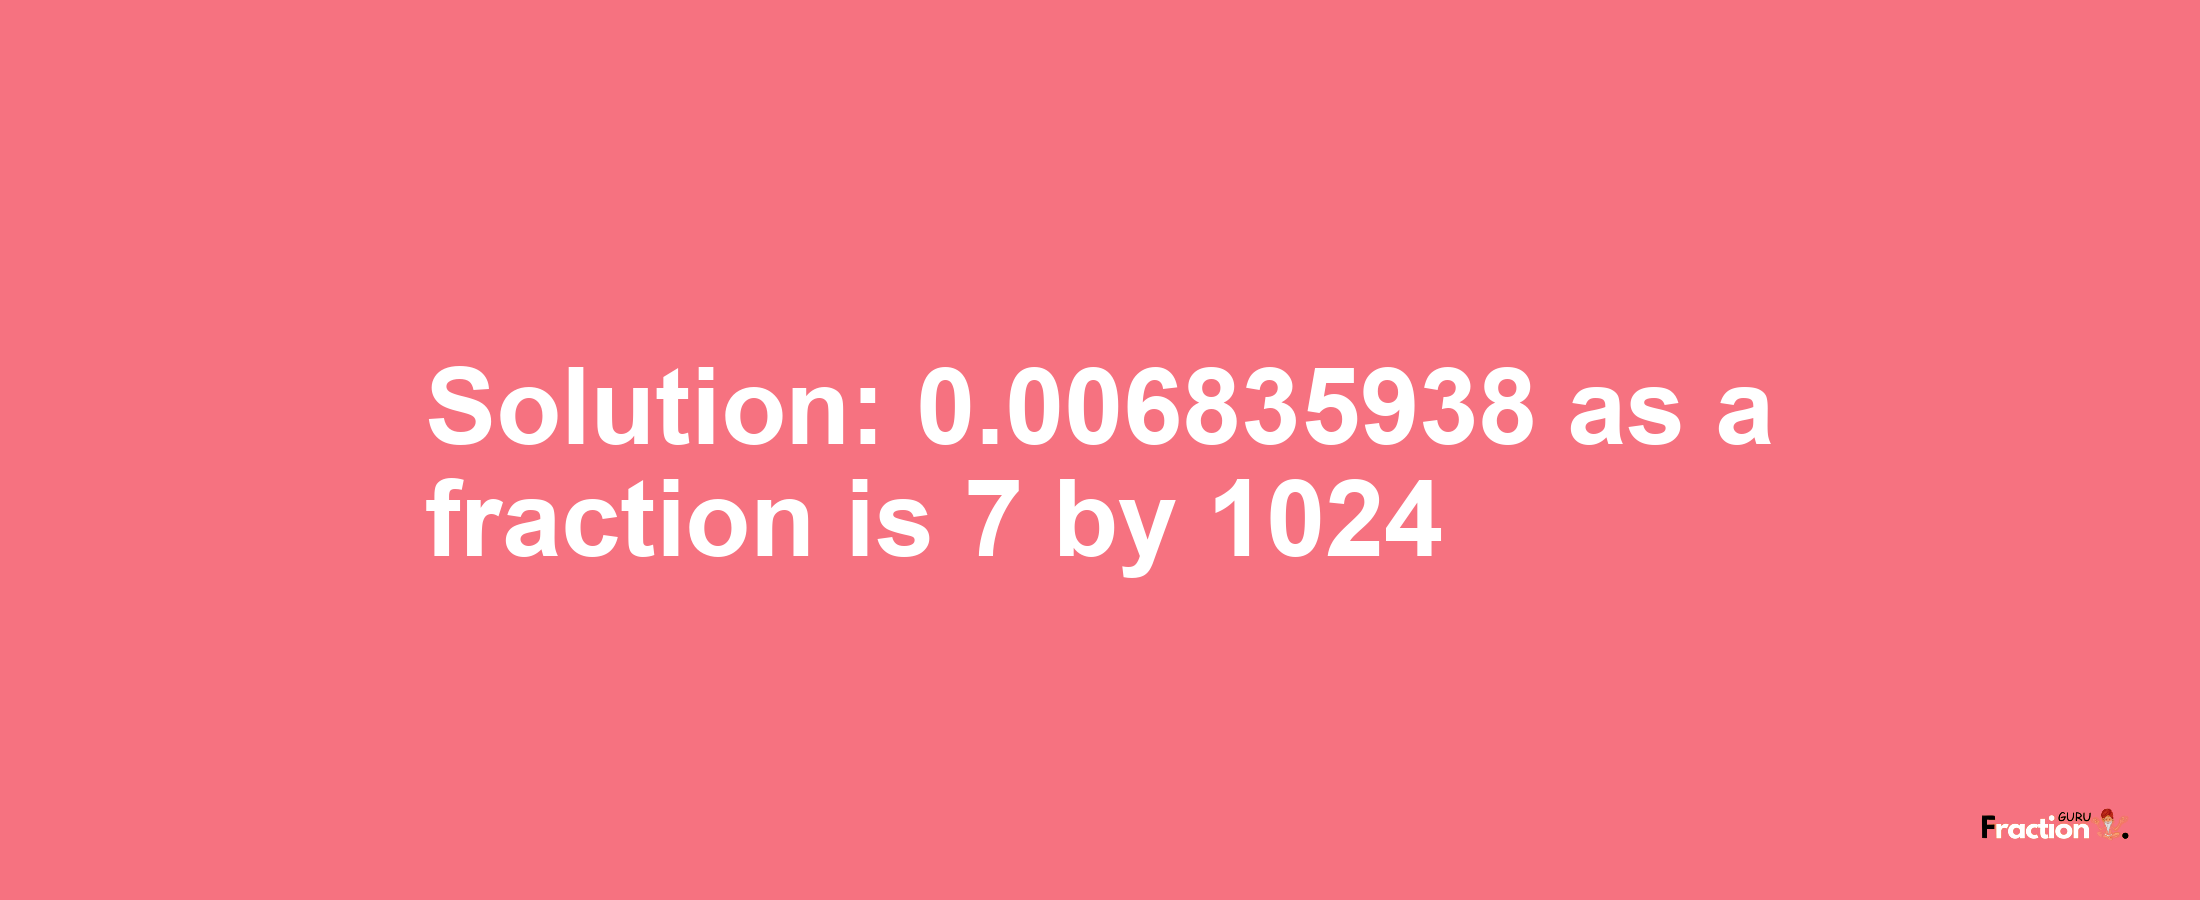 Solution:0.006835938 as a fraction is 7/1024